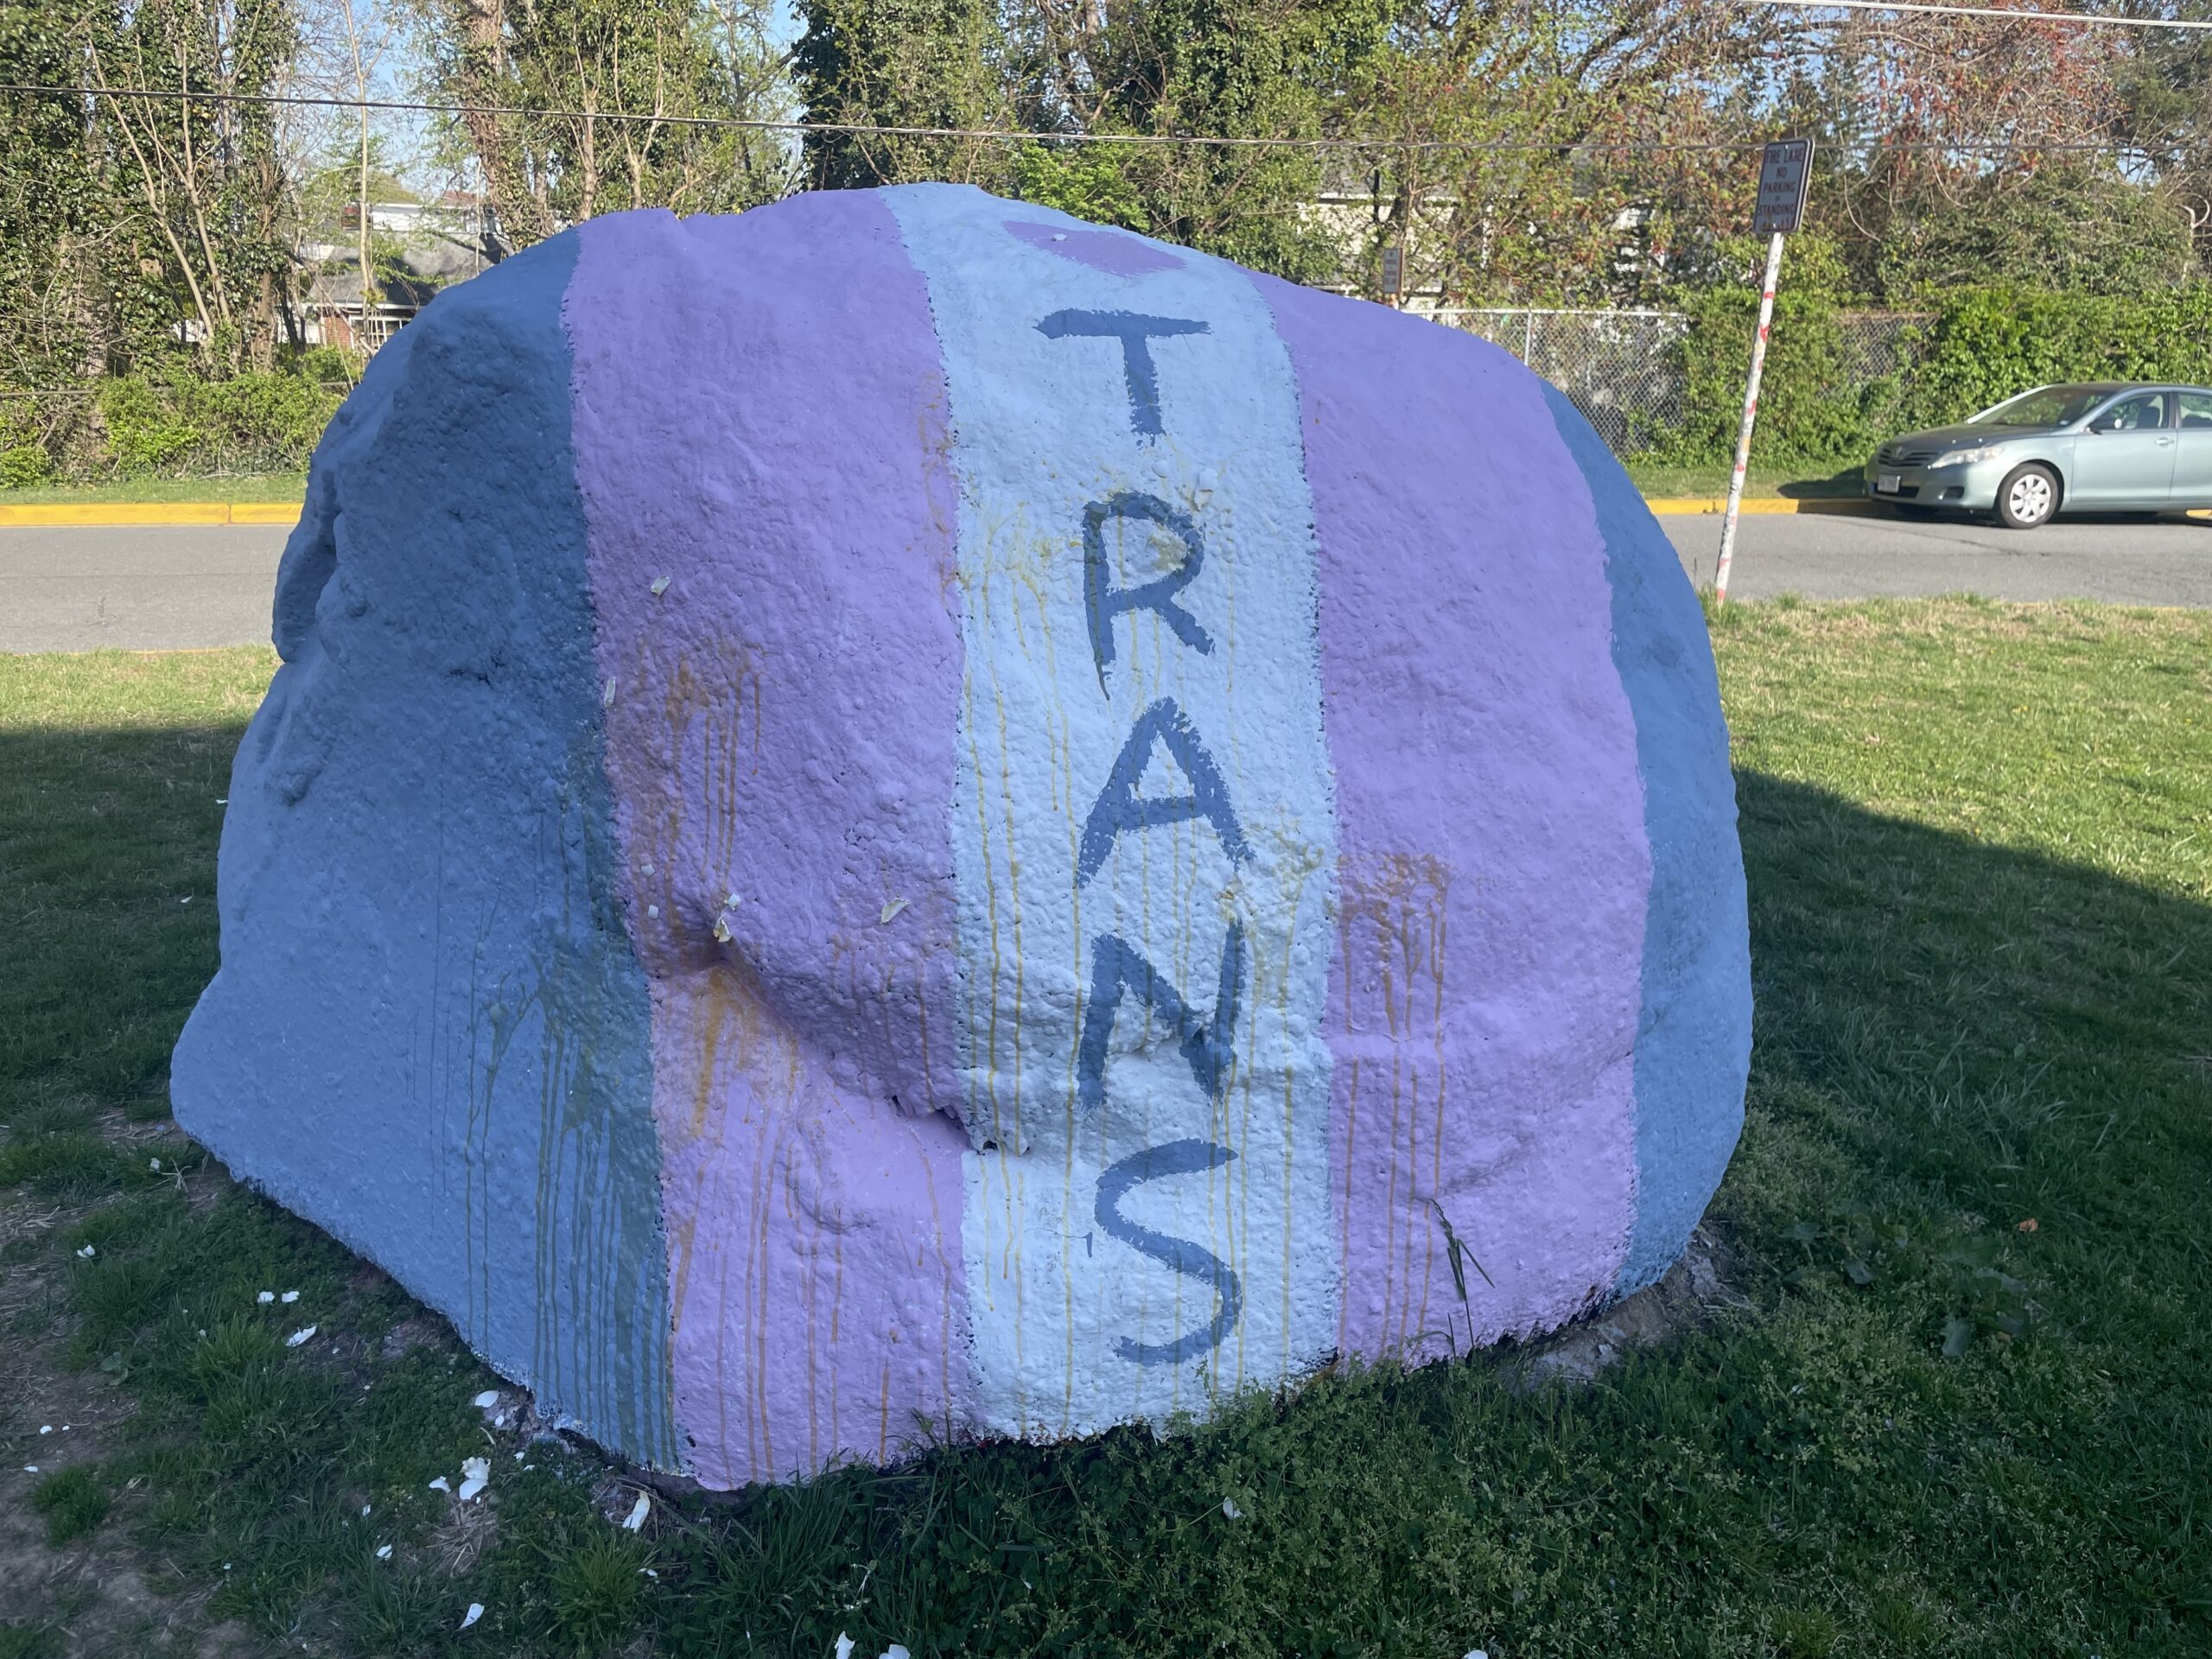 The rock, which was originally painted for International Transgender Day of Visibility, was egged by an unknown party.